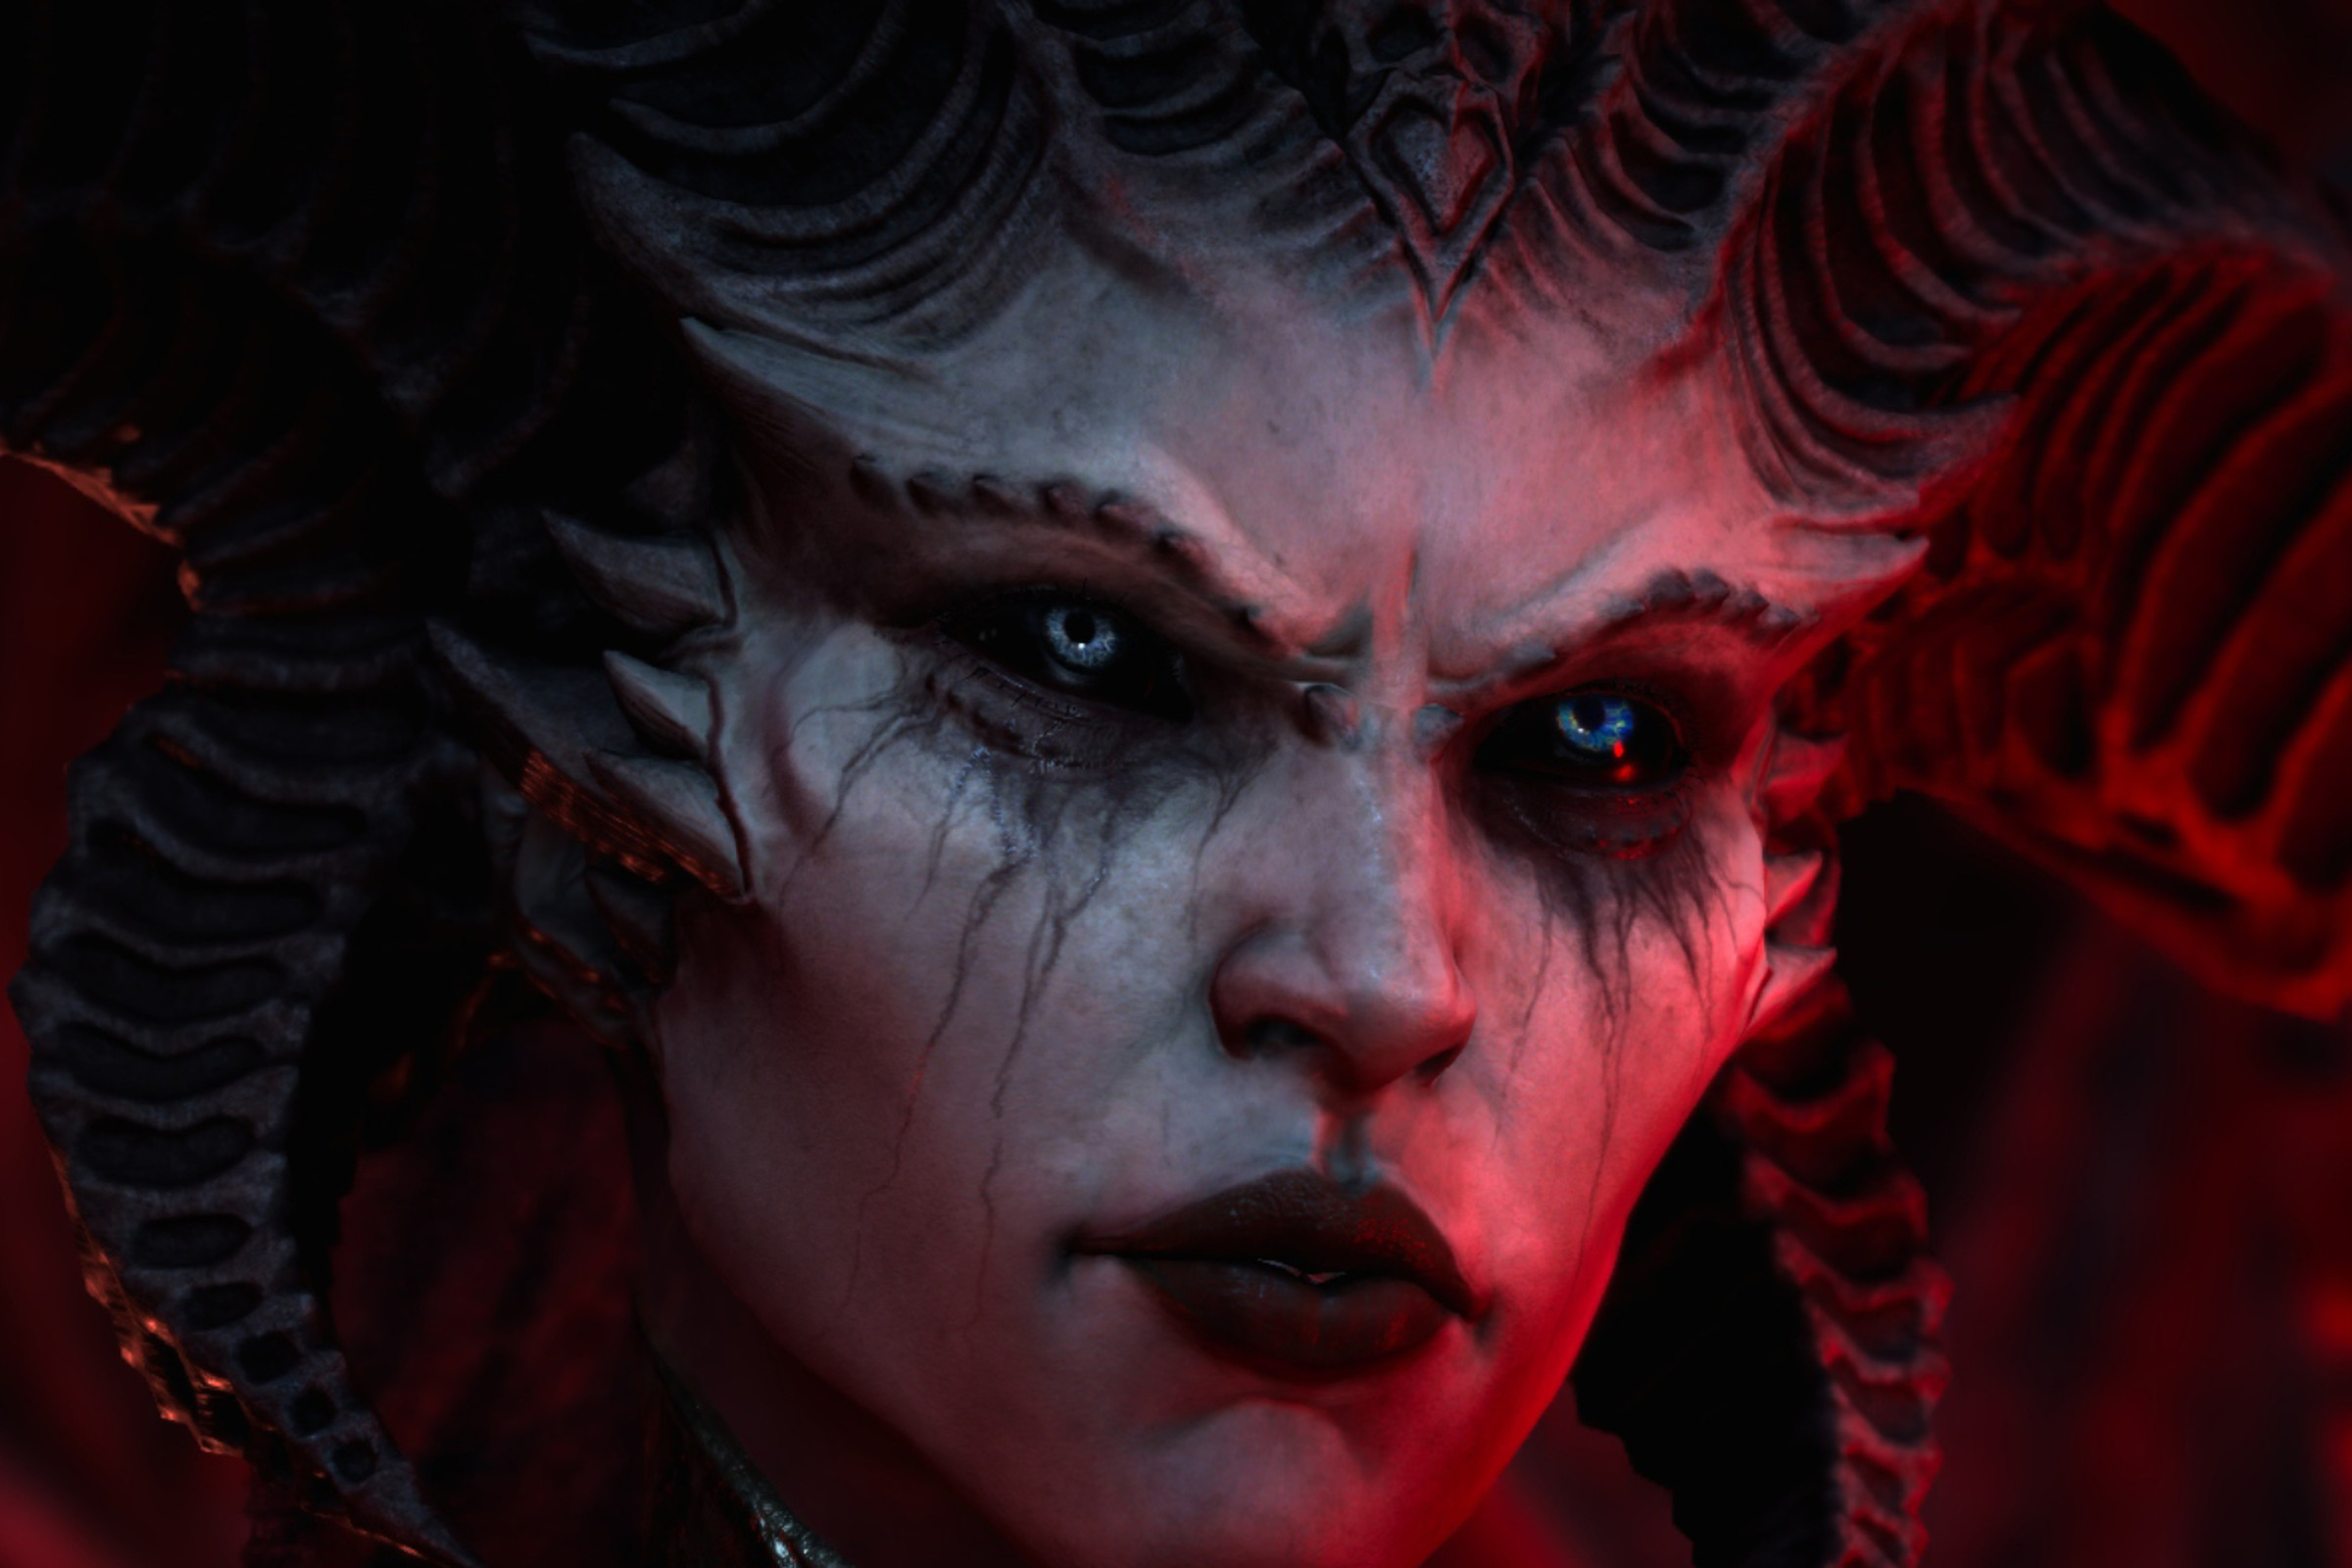 Screenshot from Diablo IV featuring a close-up on the face of the demonic monster Lilith